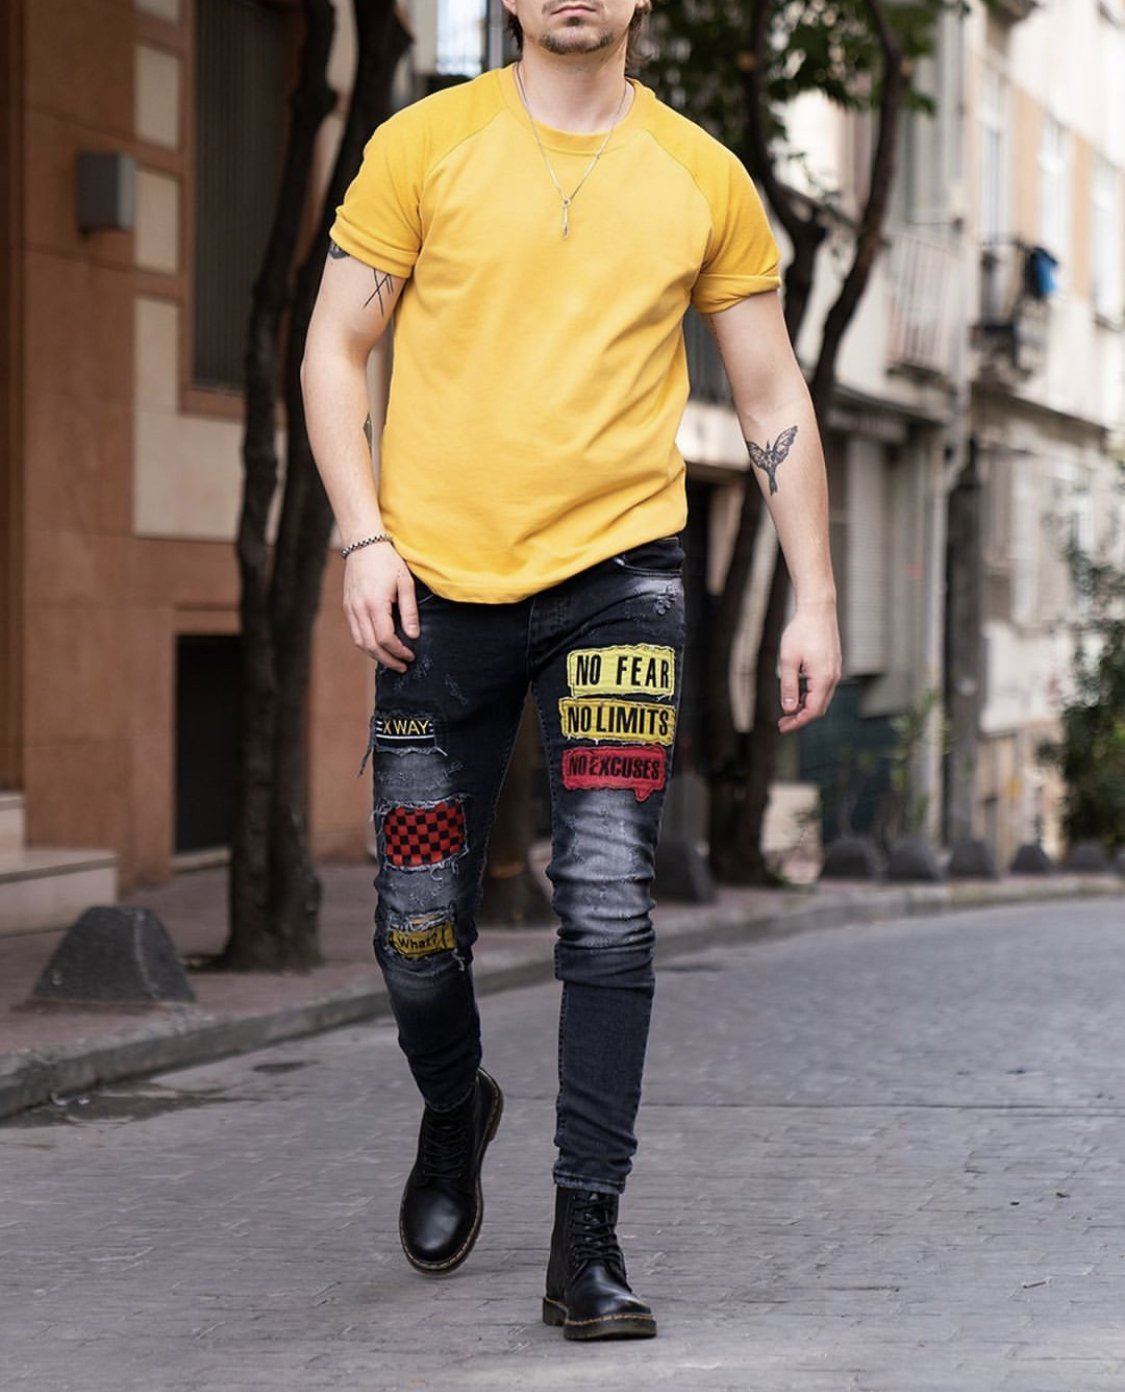 A man in a FEARLESS yellow t-shirt with a skinny fit walking down the street.